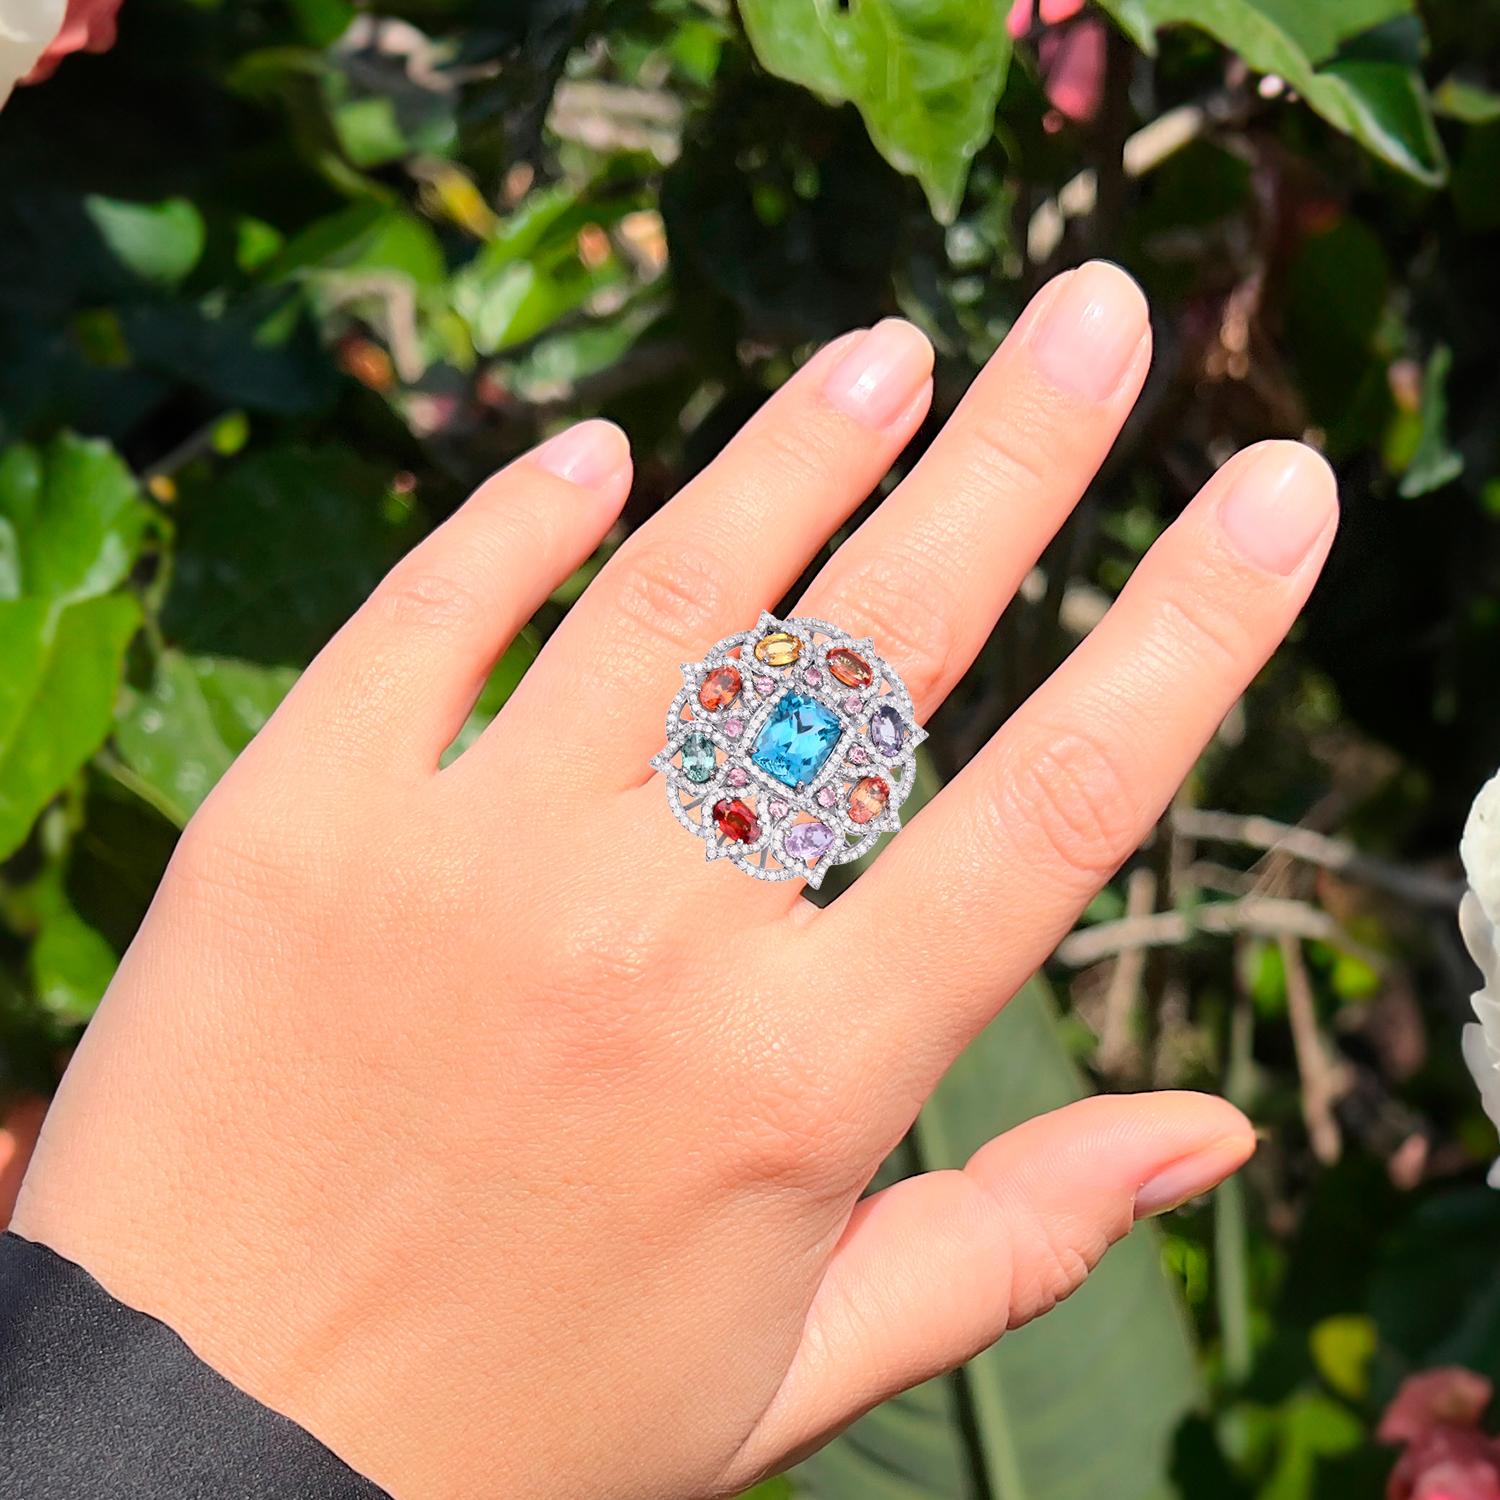 Art Deco Blue Topaz Ring With Multicolored Sapphires Tourmalines & Diamonds 11.18 Carats For Sale